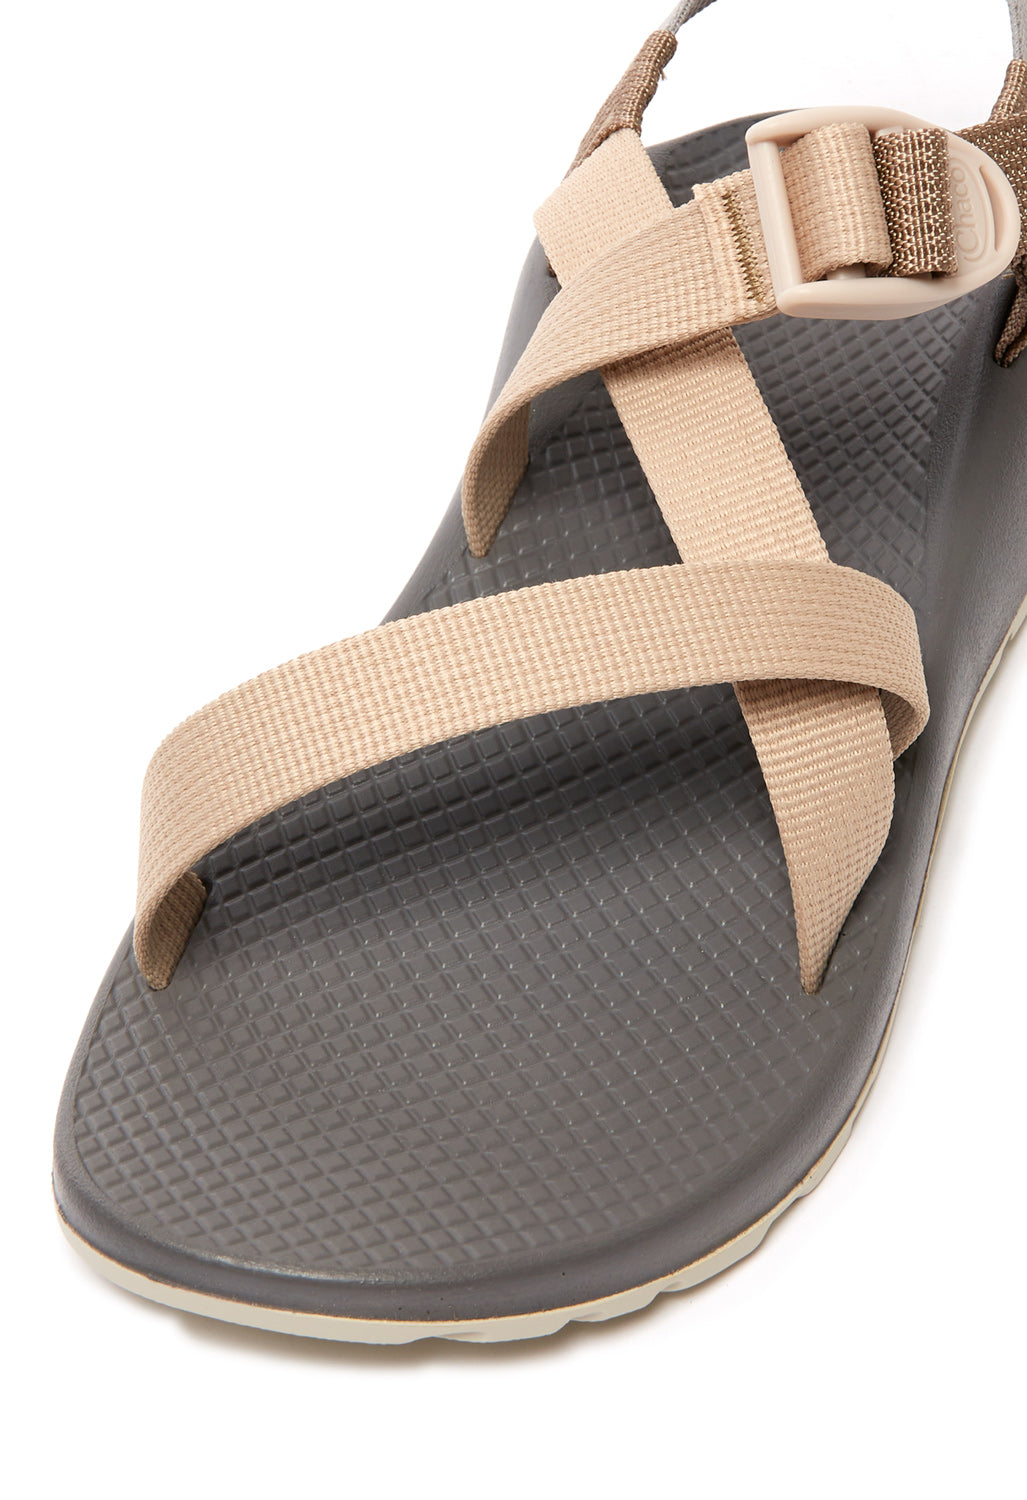 Chaco Women's Z1 Classic Sandals - Earth Gray